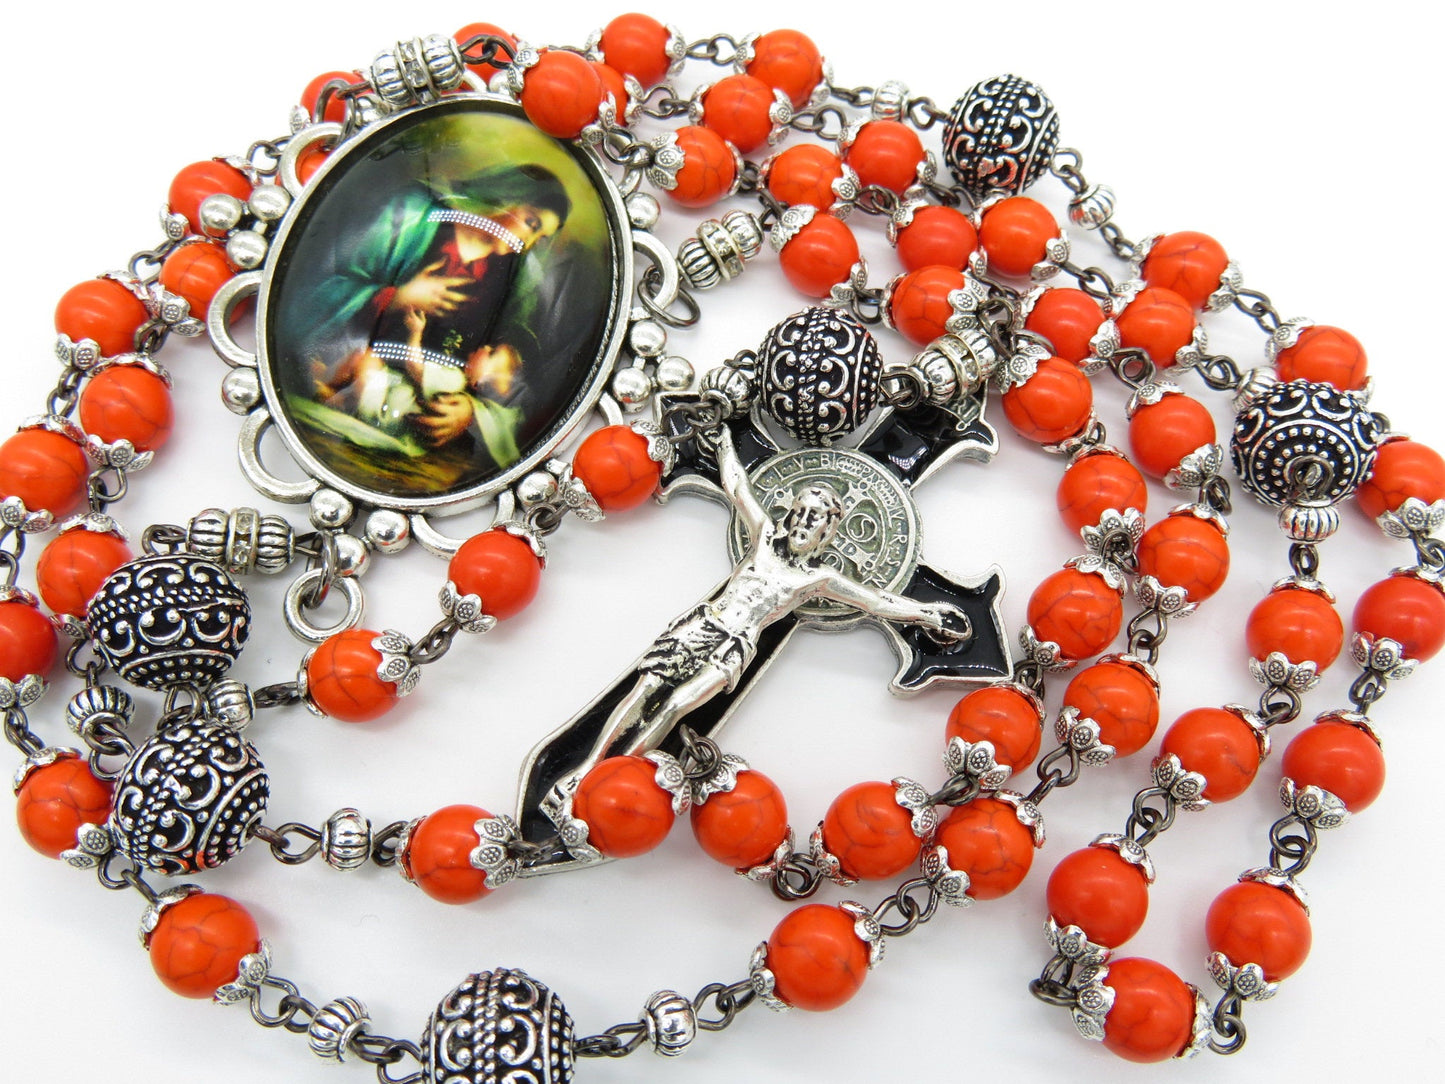 Heirloom Virgin Mary unique rosary beads with orange gemstone beads, silver bead caps, pater beads, picture centre medal and silver and black enamel crucifix.